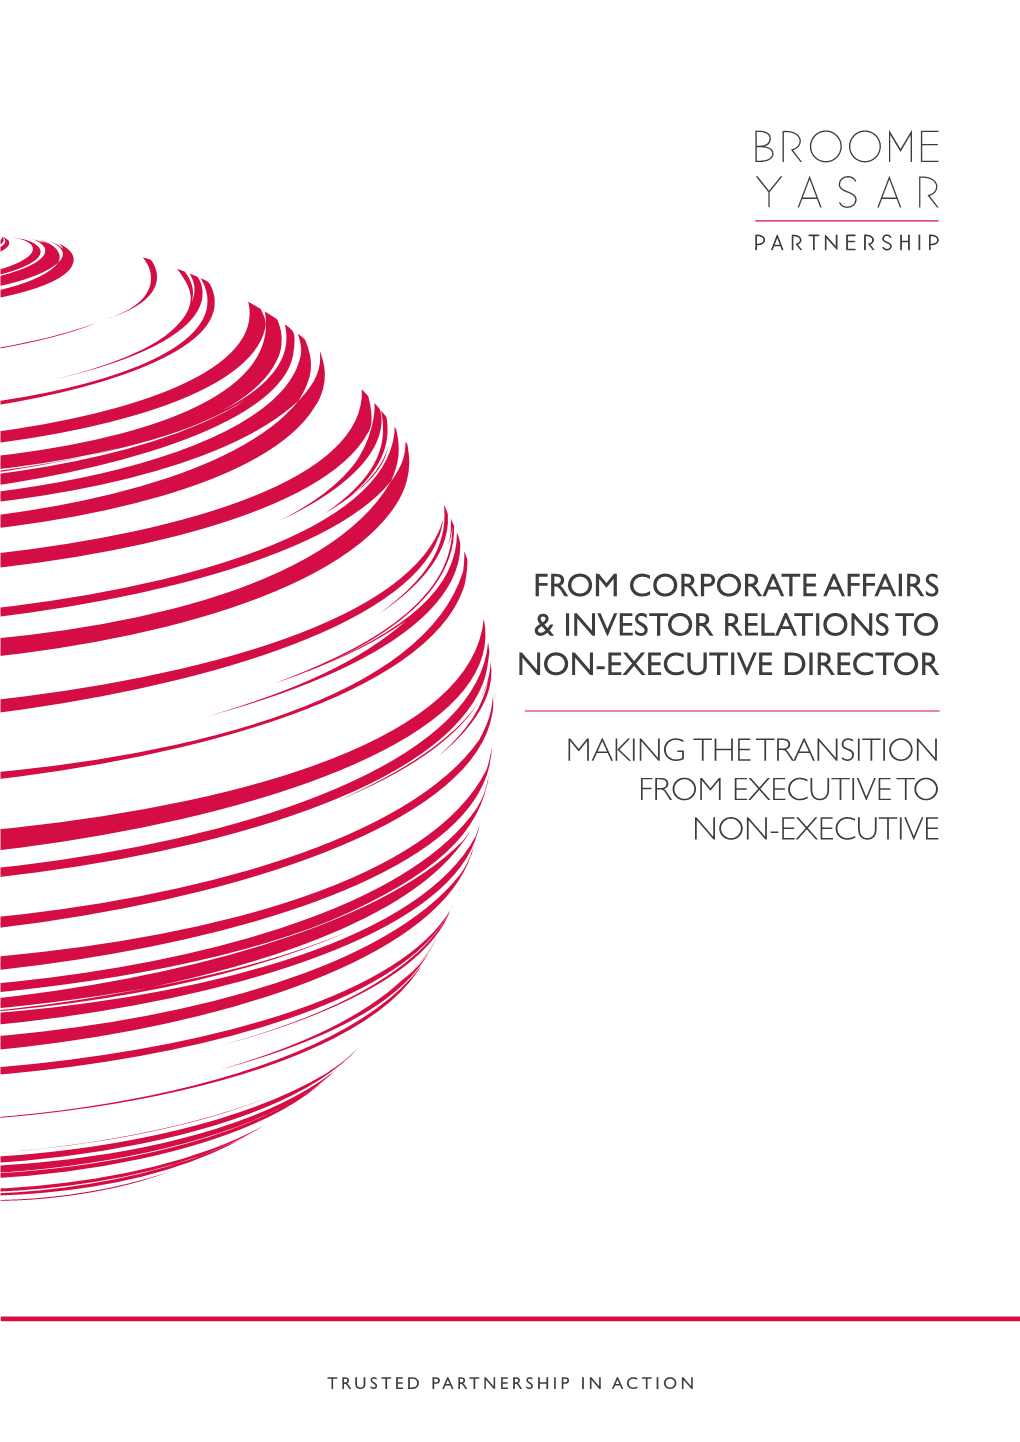 From Corporate Affairs and Investor Relations to Non-Executive Director